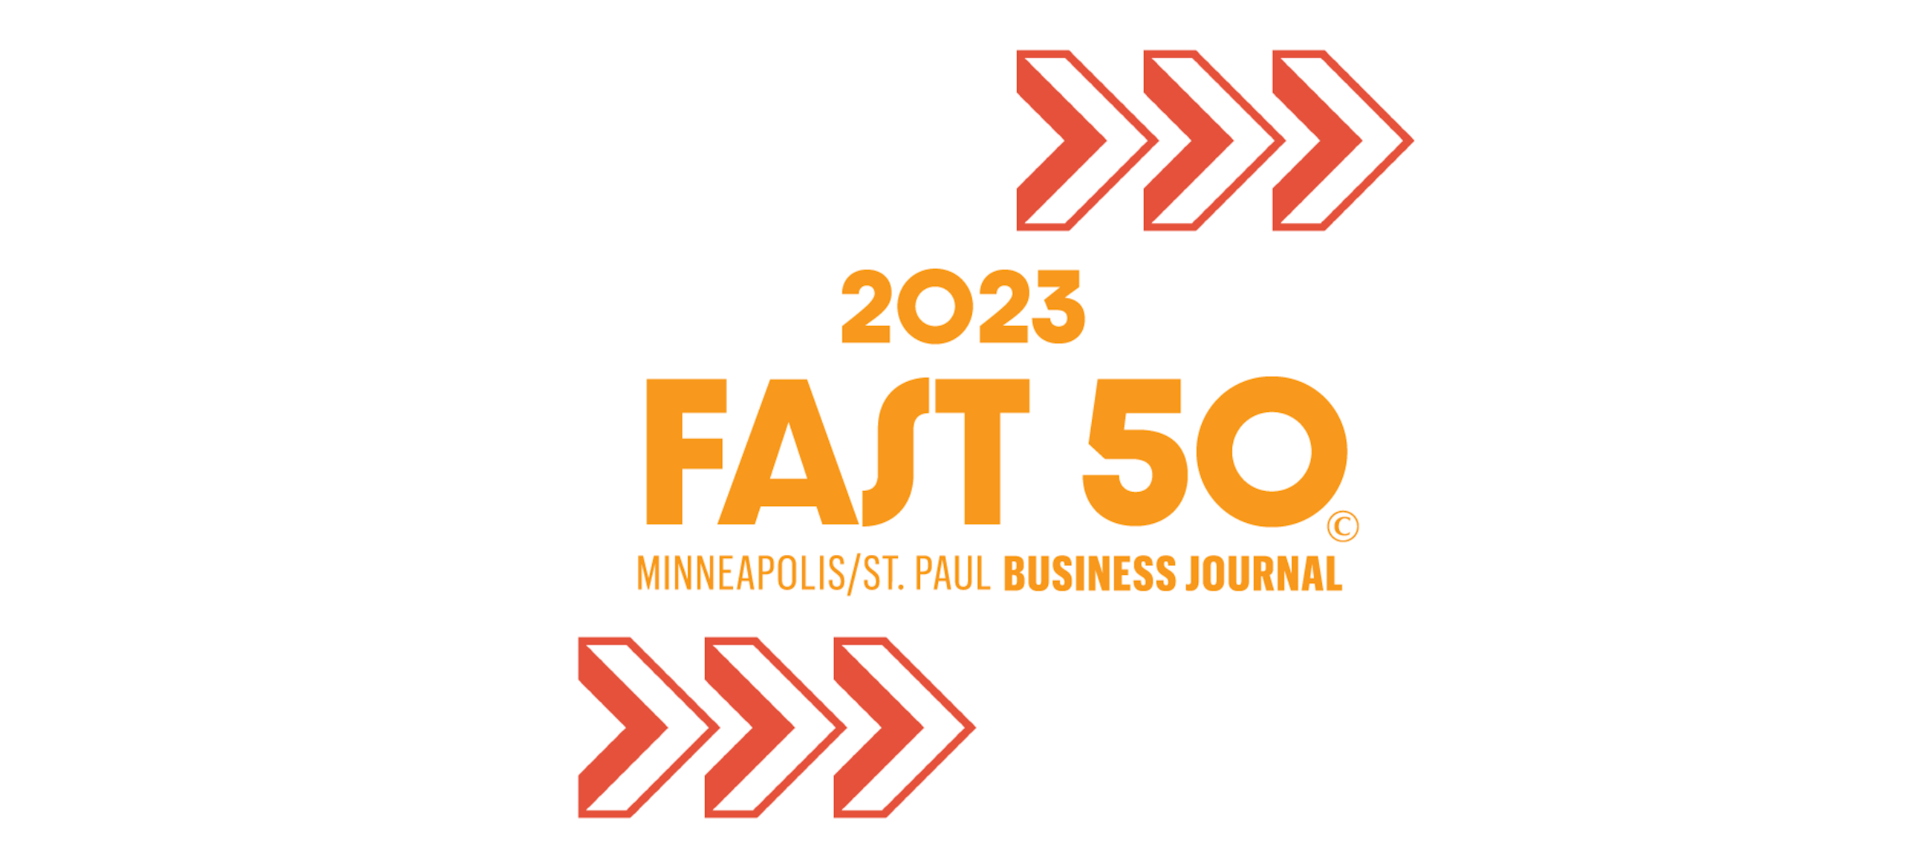 Horizontal selected as 2023 Fast 50 honoree by Minneapolis/St. Paul Business Journal 